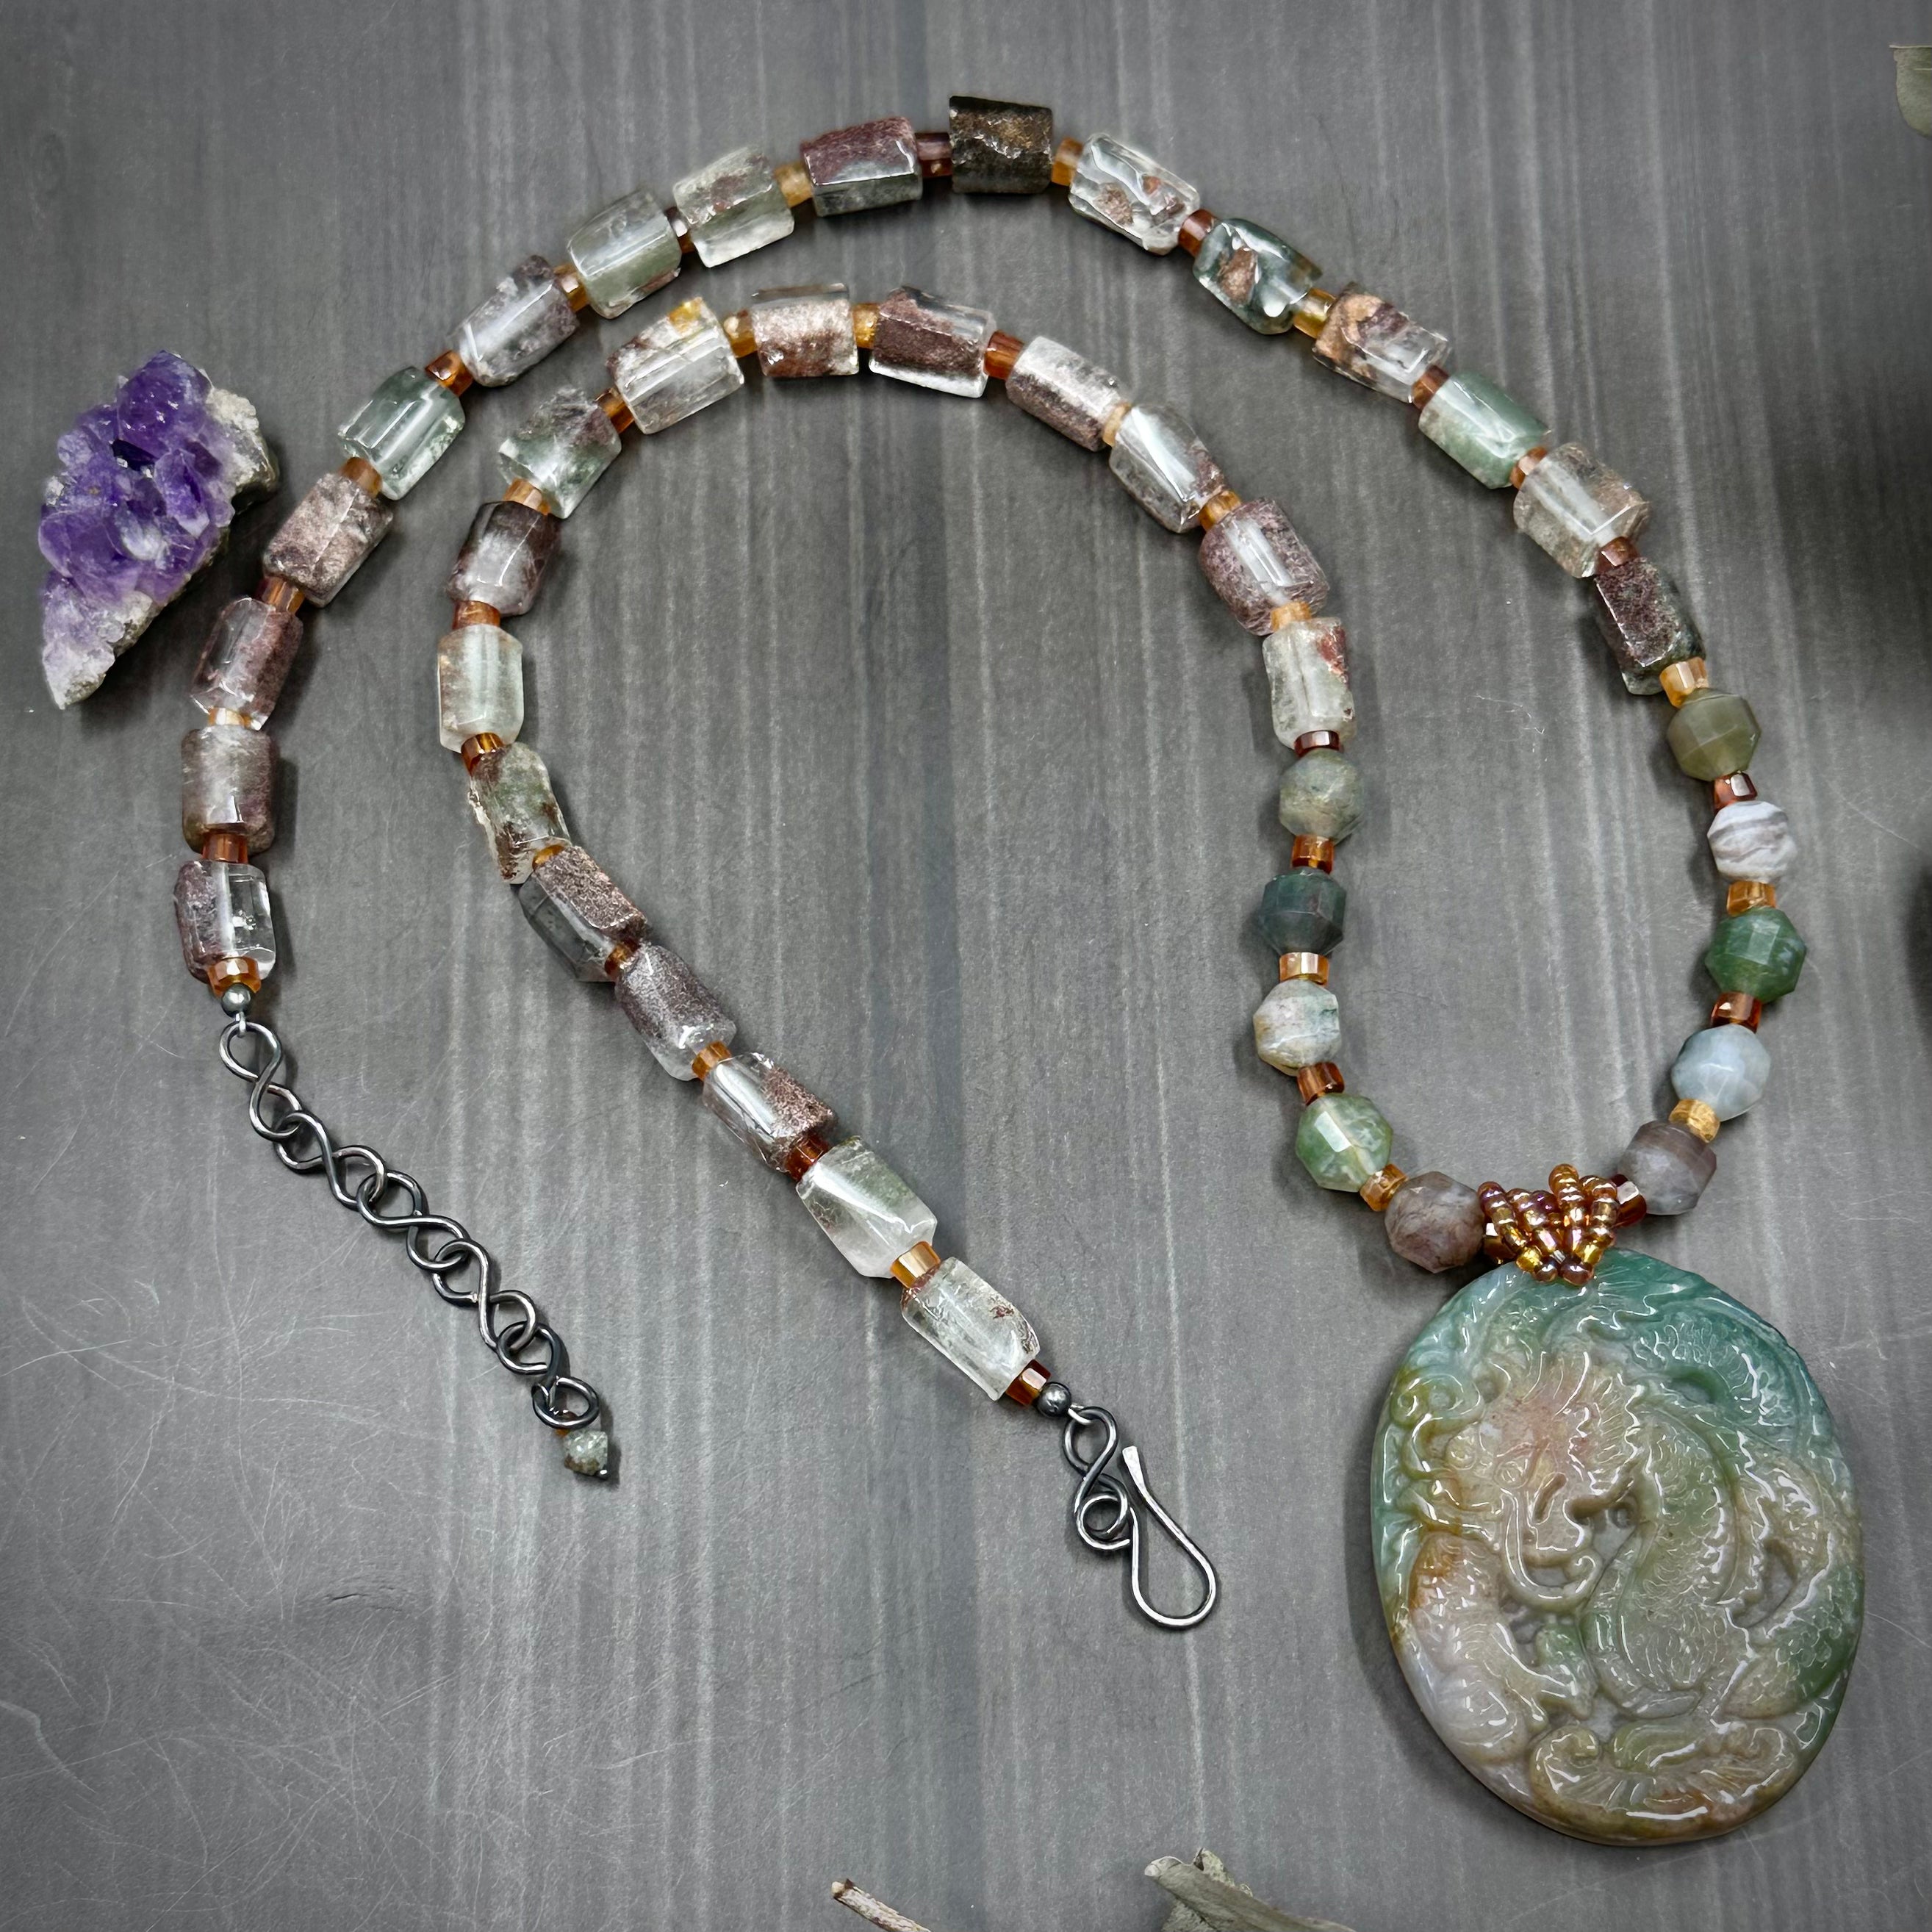 Indian Agate, Lodalite, and Garnet Dragon Statement Necklace